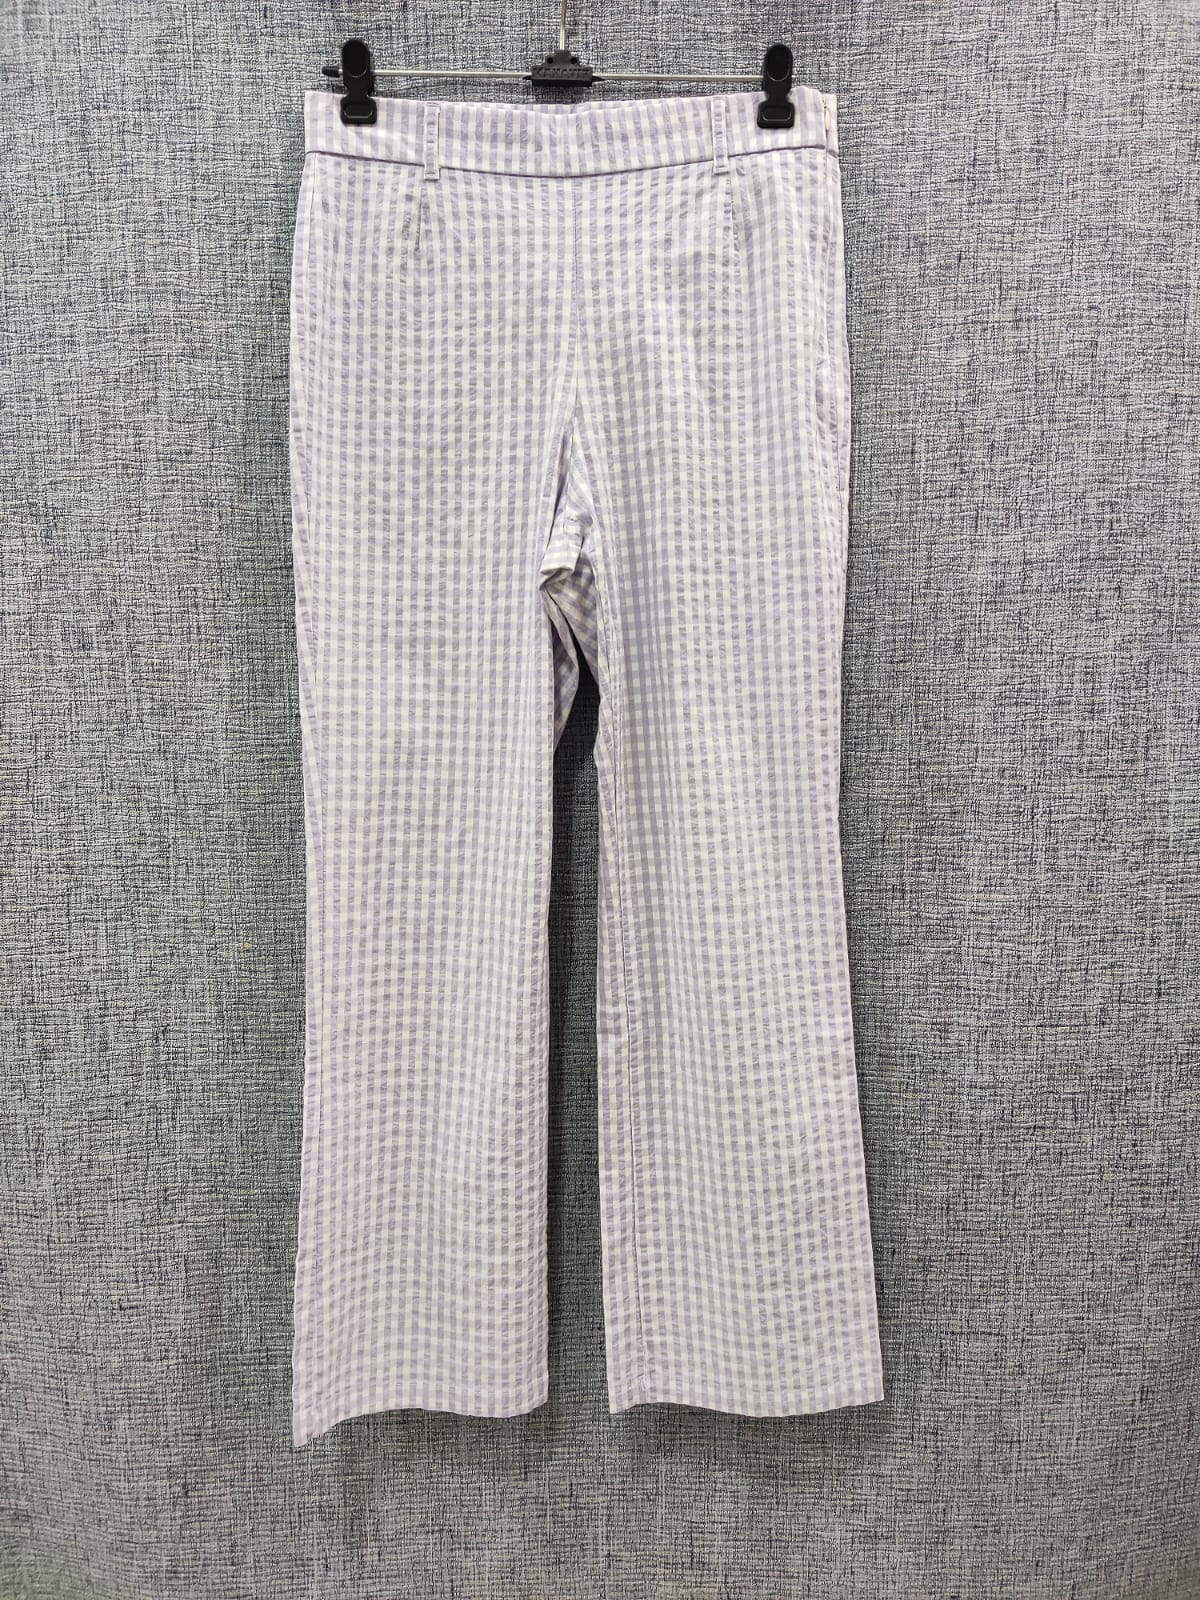 Zara Gingham Trousers with Ruffle in Black/White — UFO No More